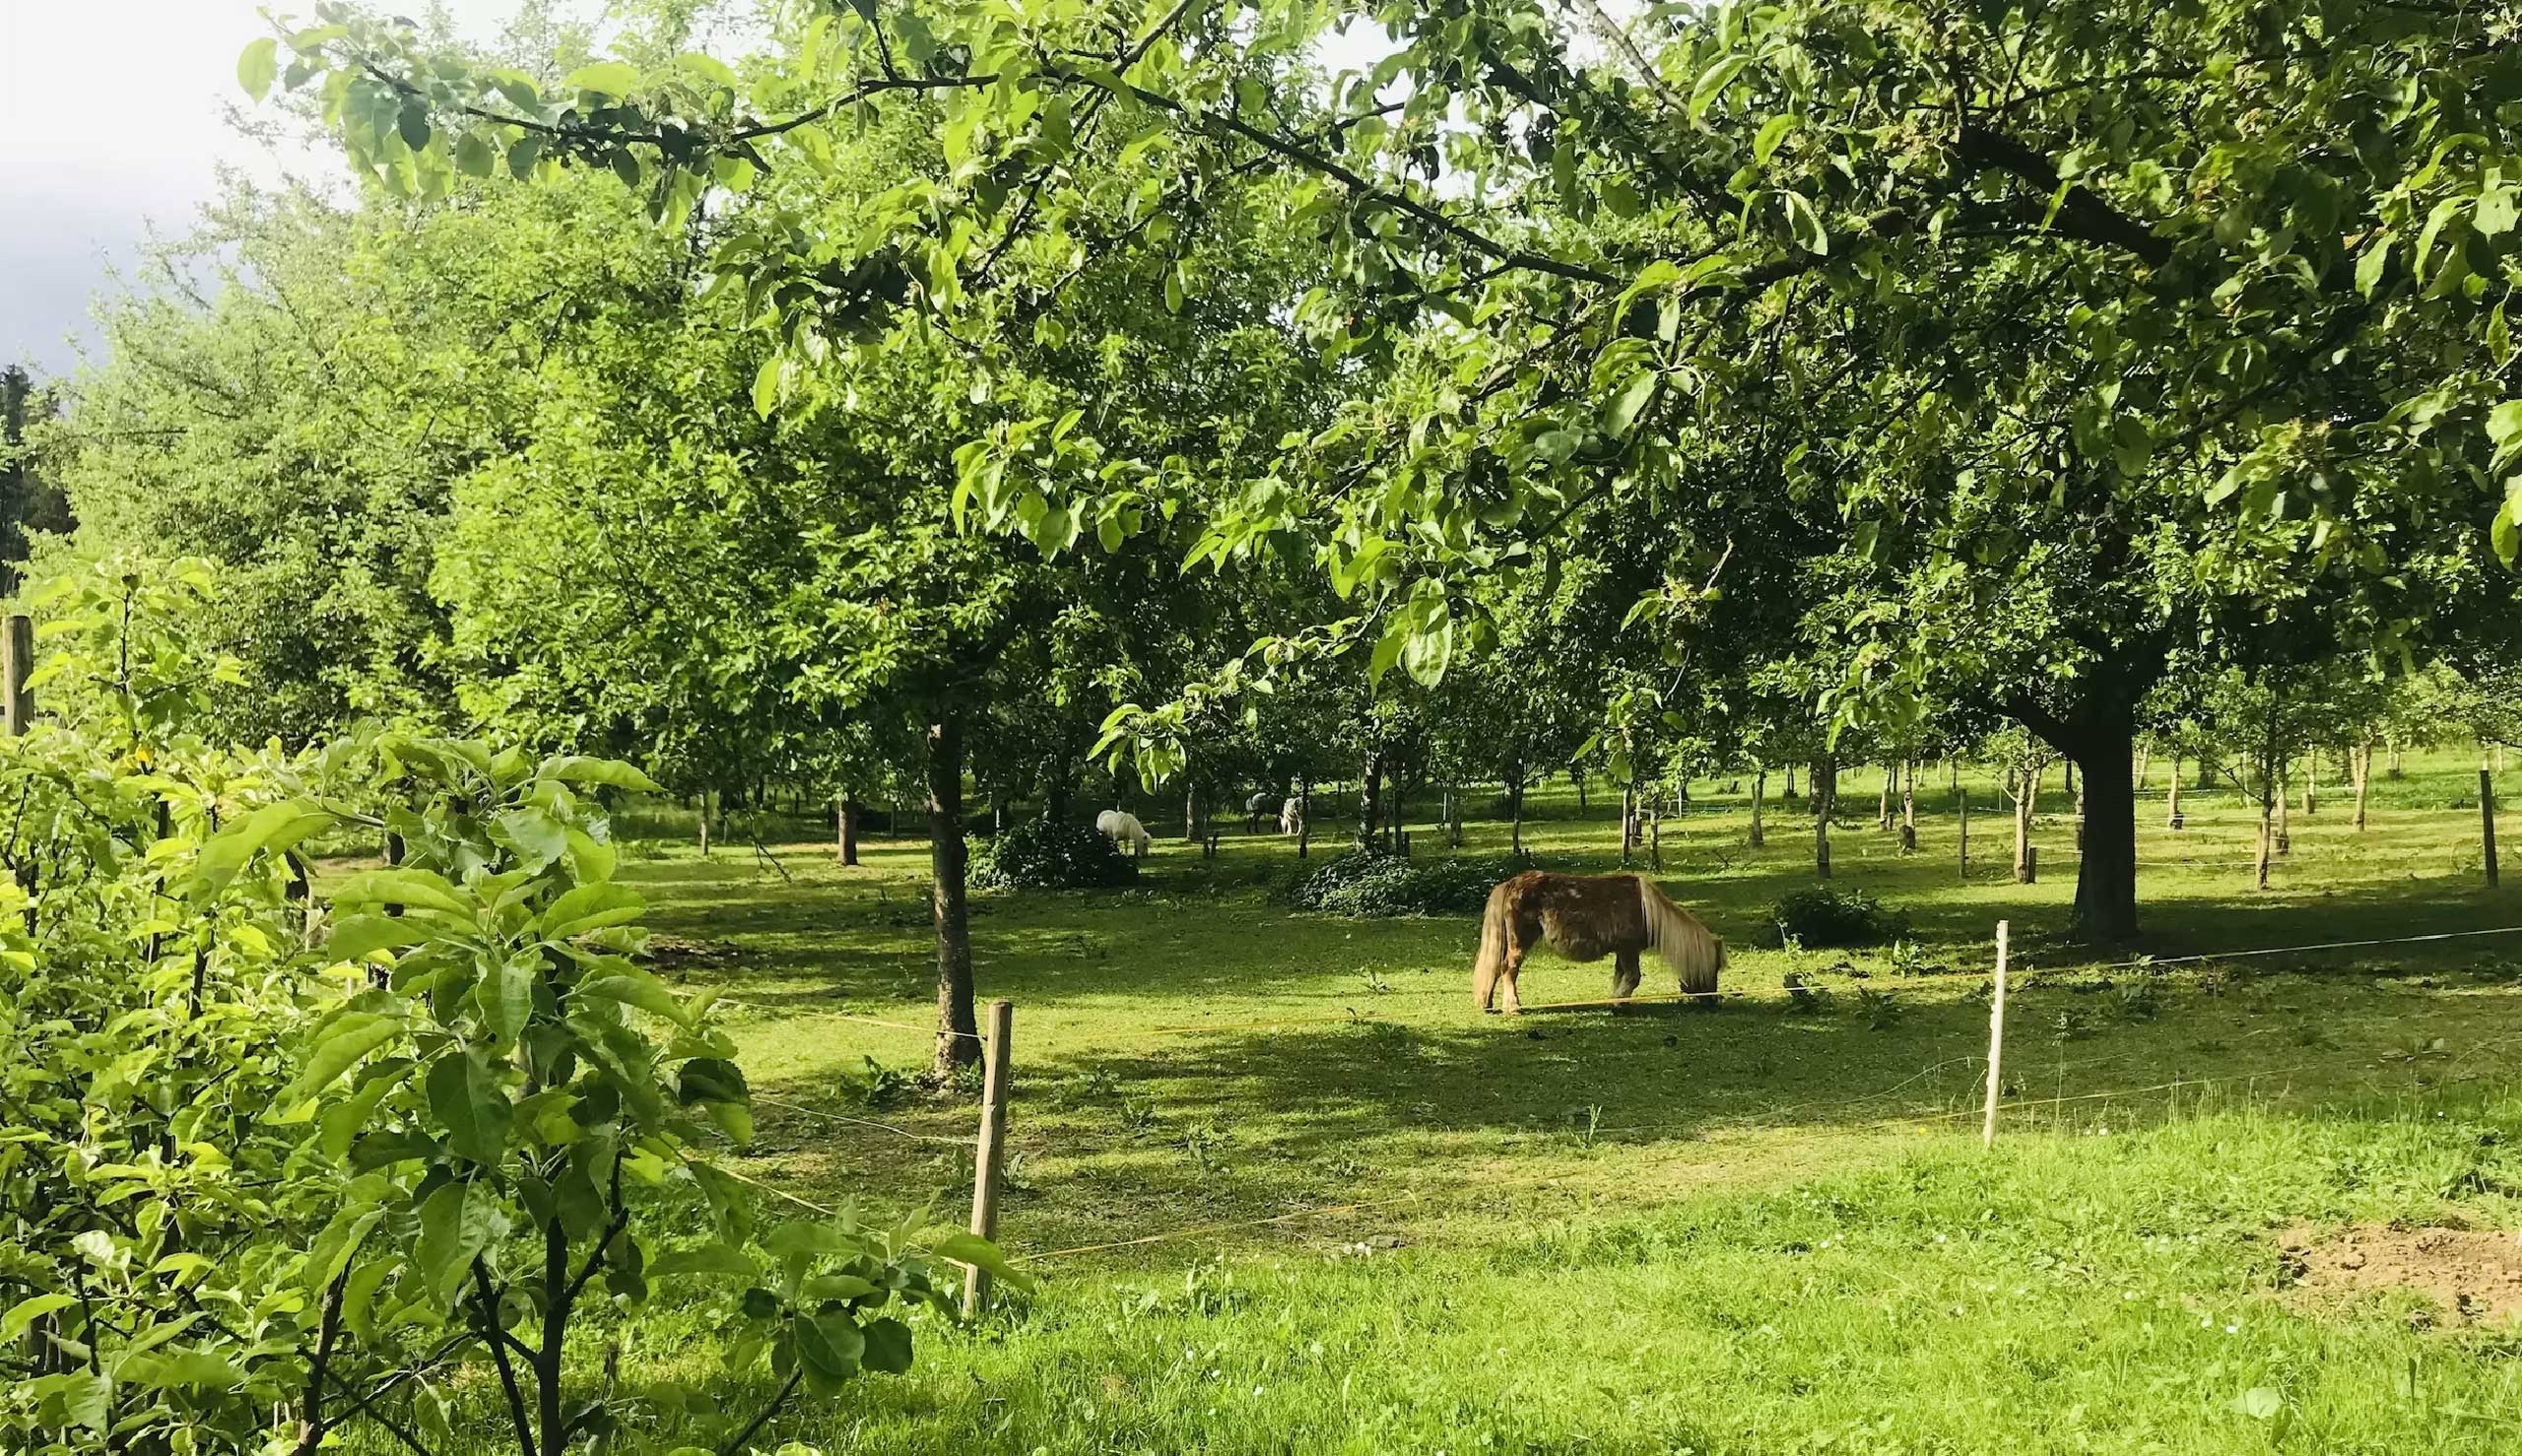 There are campsites and grazing areas for the six Shetland ponies in the orchard meadows. Copyright: Obsthof Moll